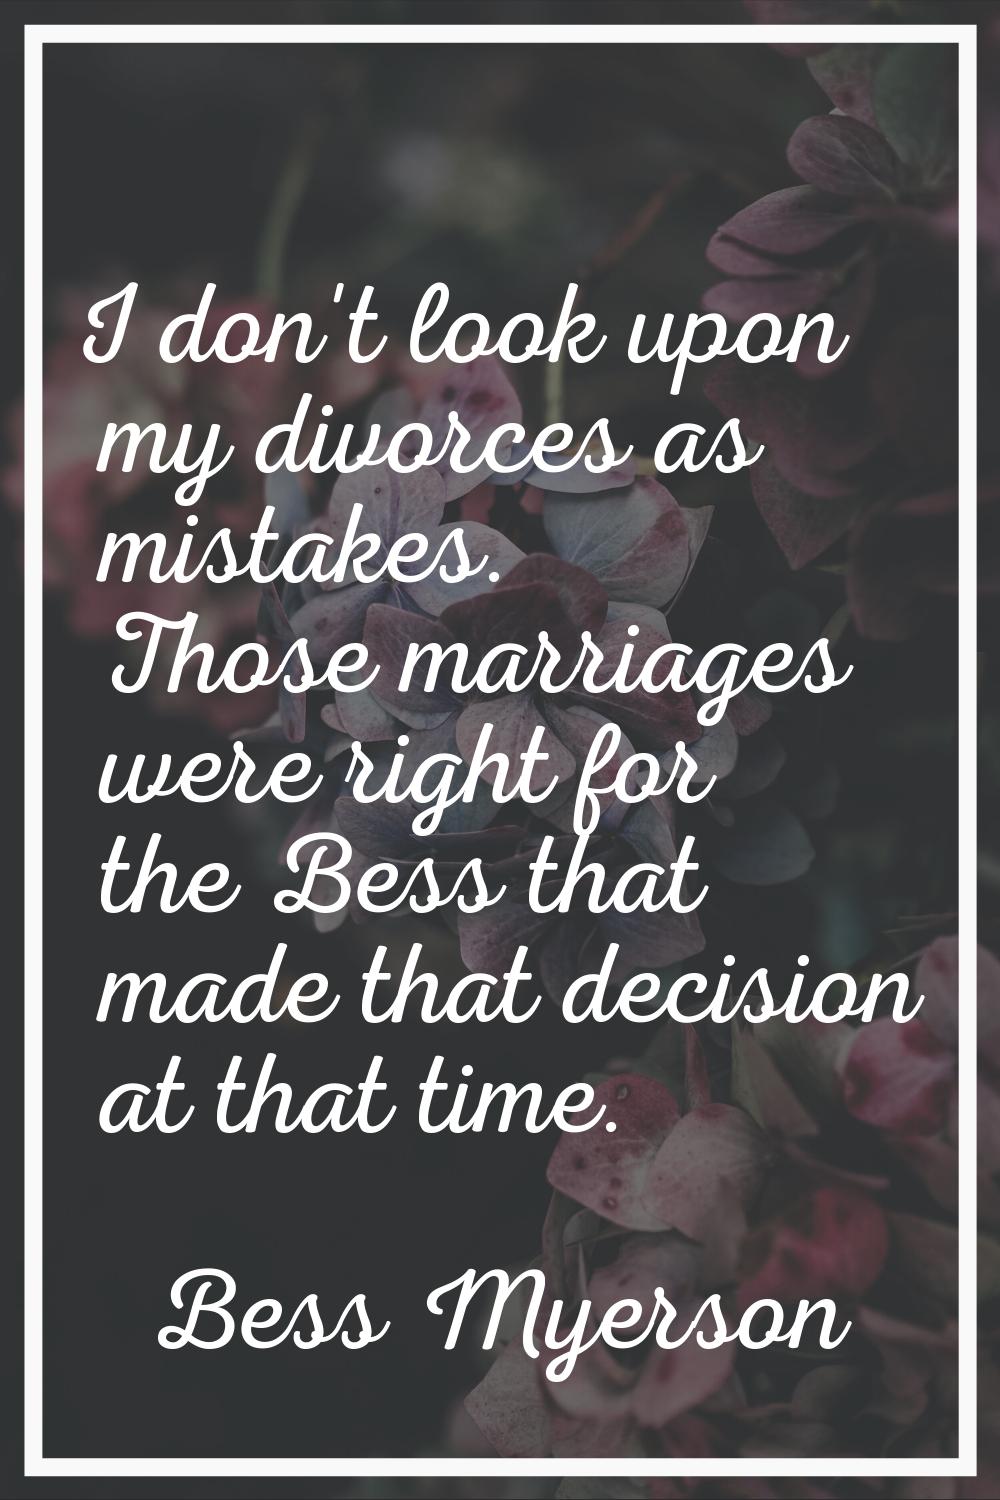 I don't look upon my divorces as mistakes. Those marriages were right for the Bess that made that d